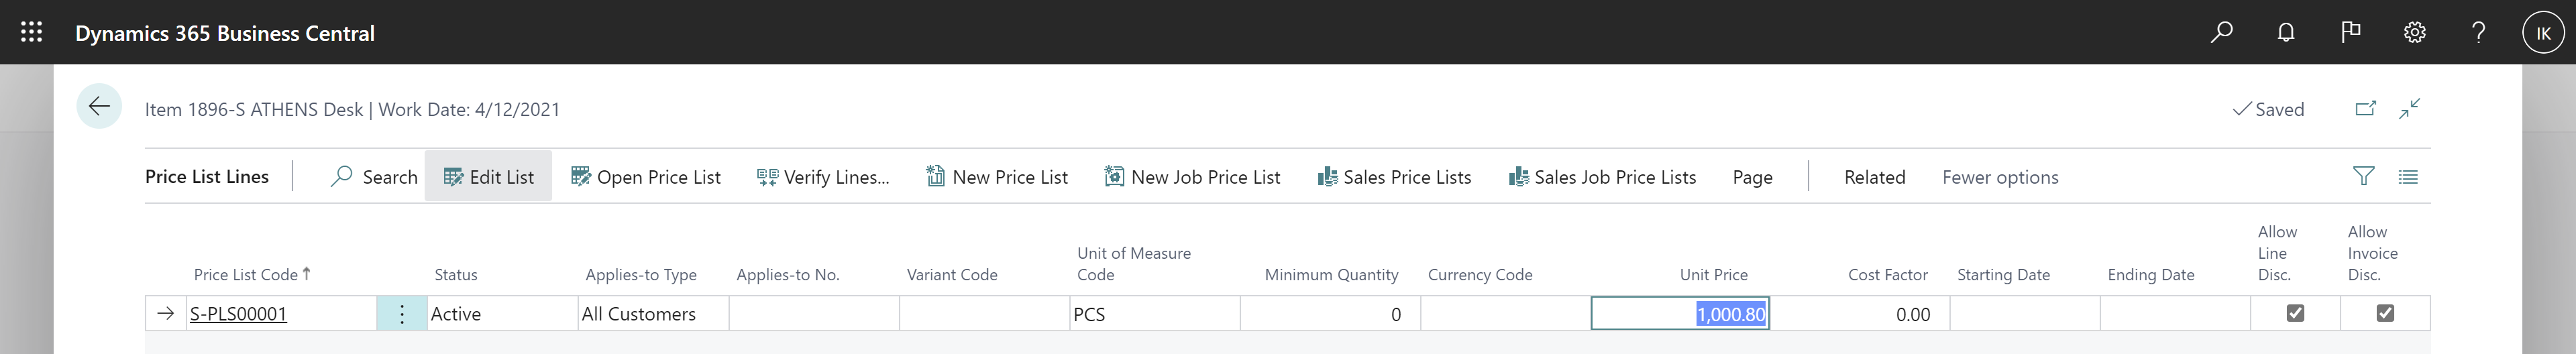 Shows editable price column in active price list line for item